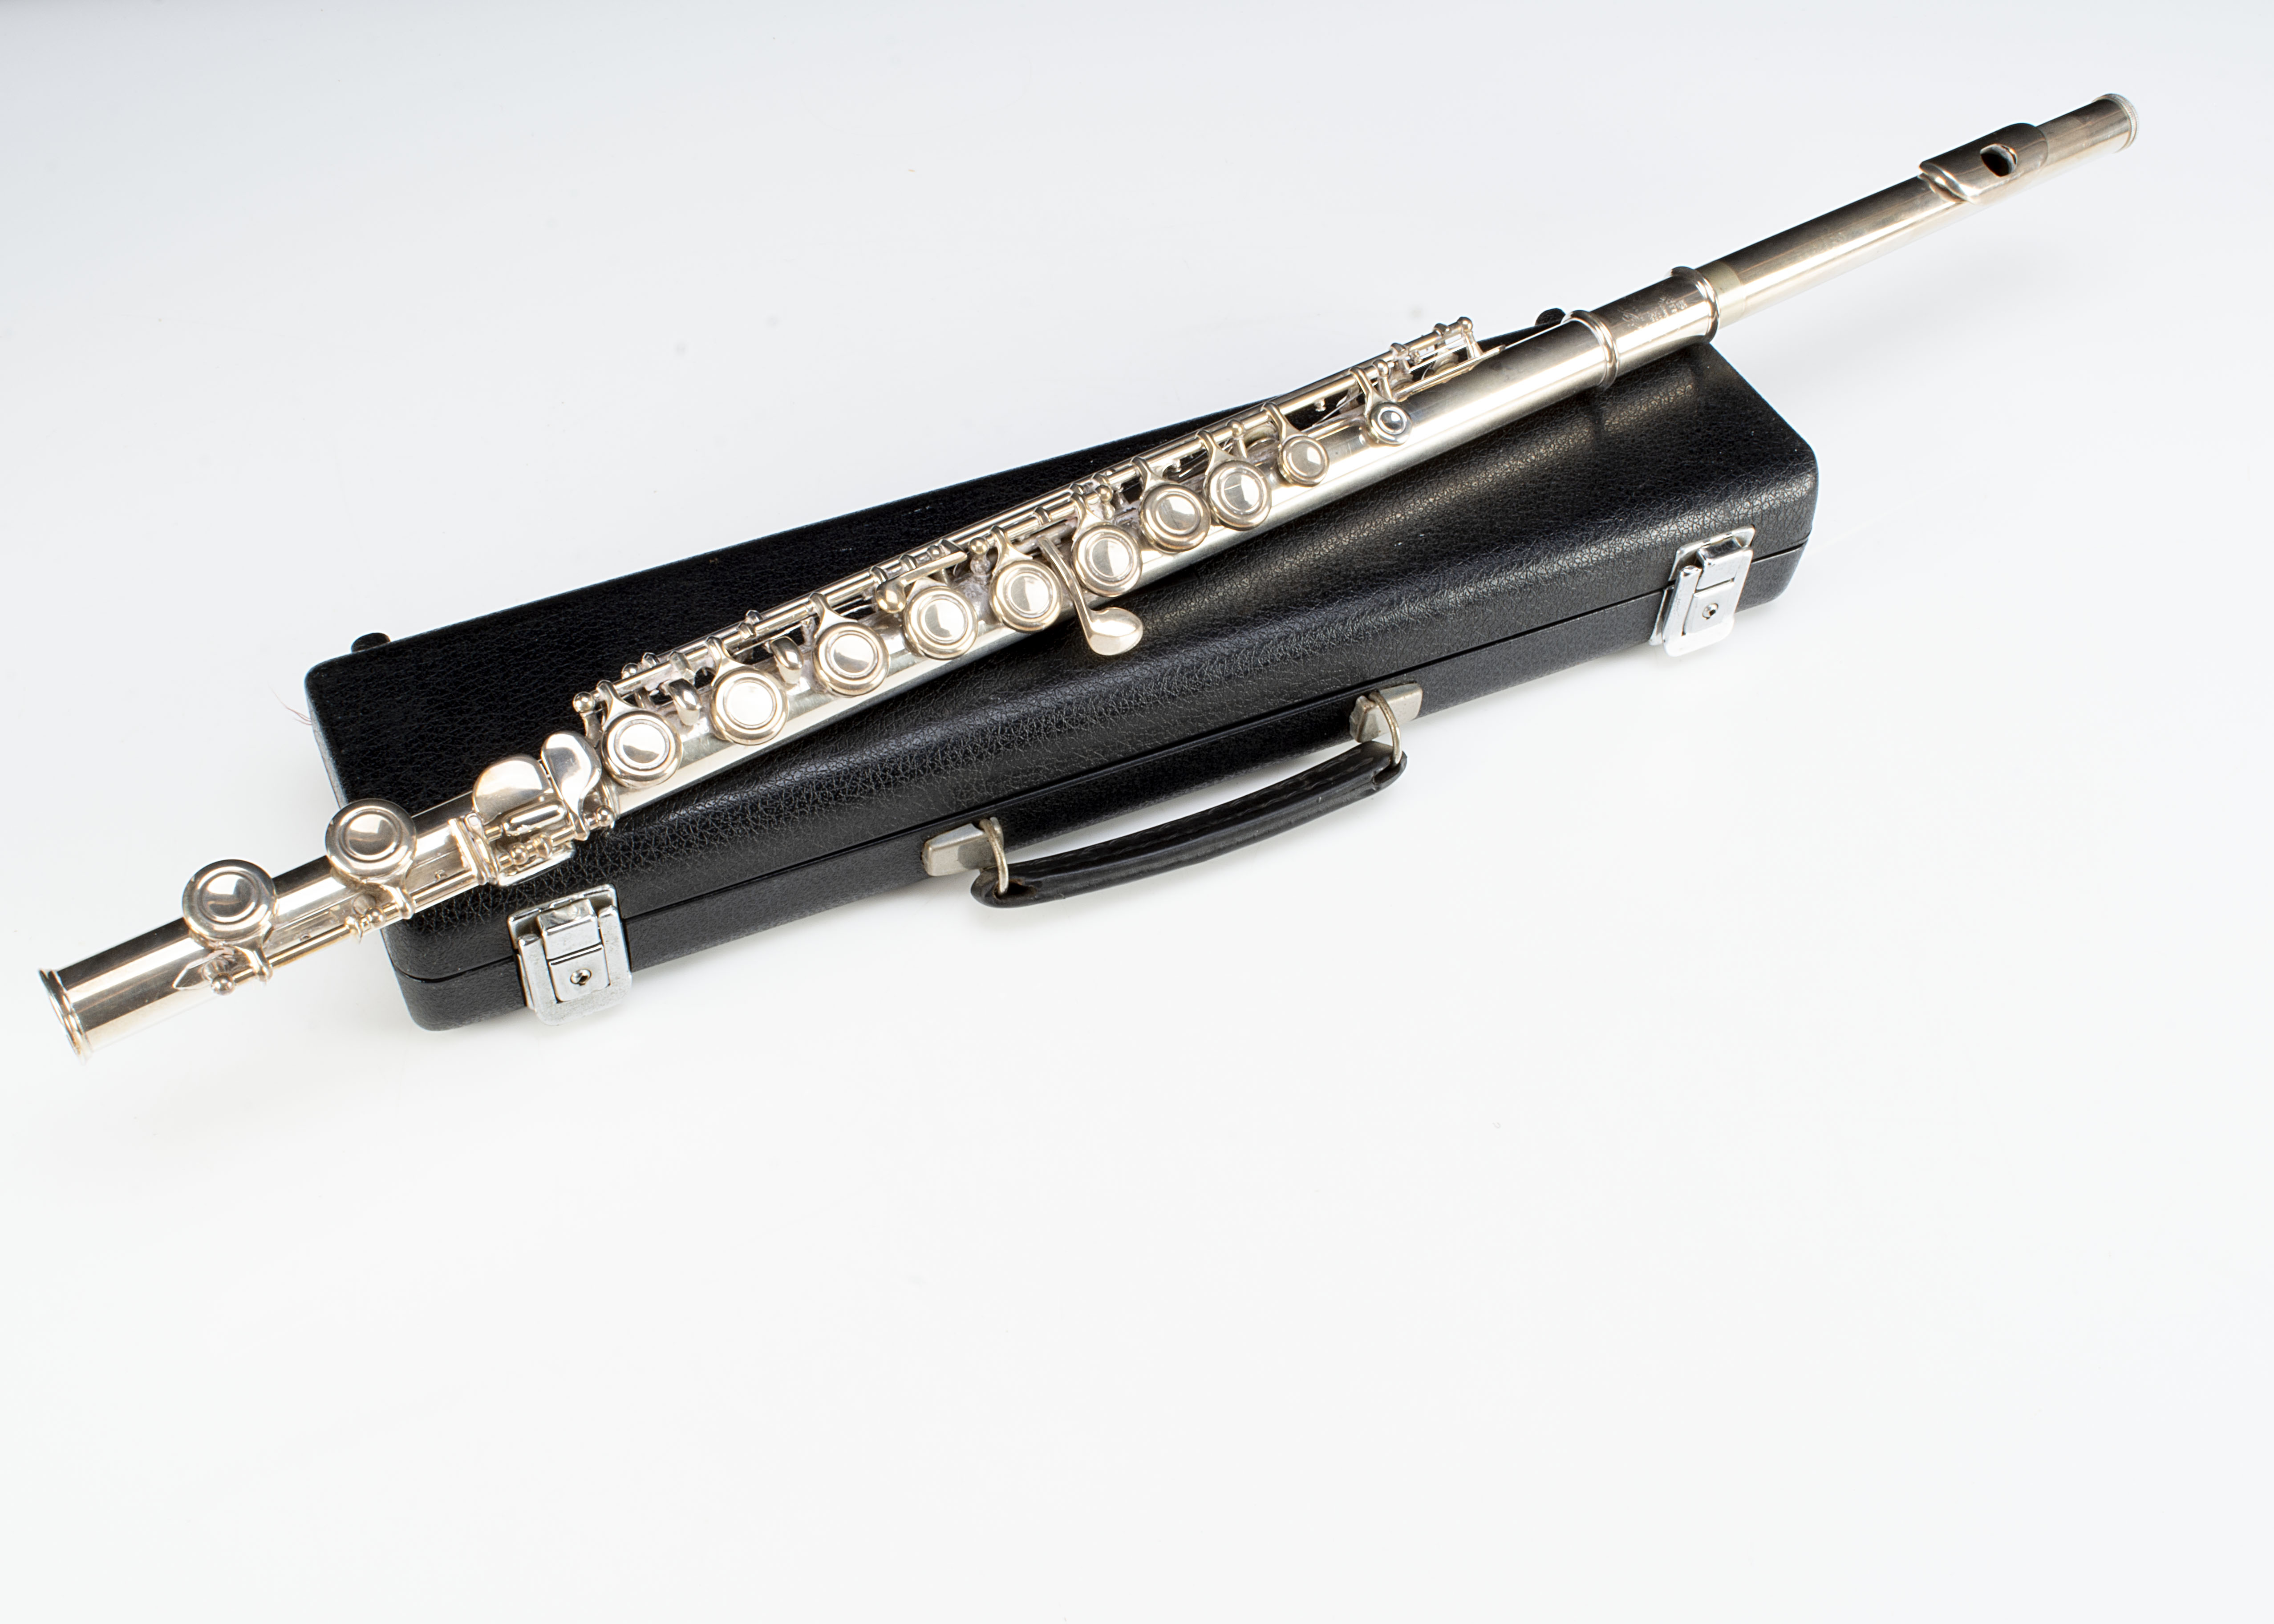 Buffet Flute, a Flute stamped Buffet Crampon Paris, Cooper scale, Made In England 680238, a little